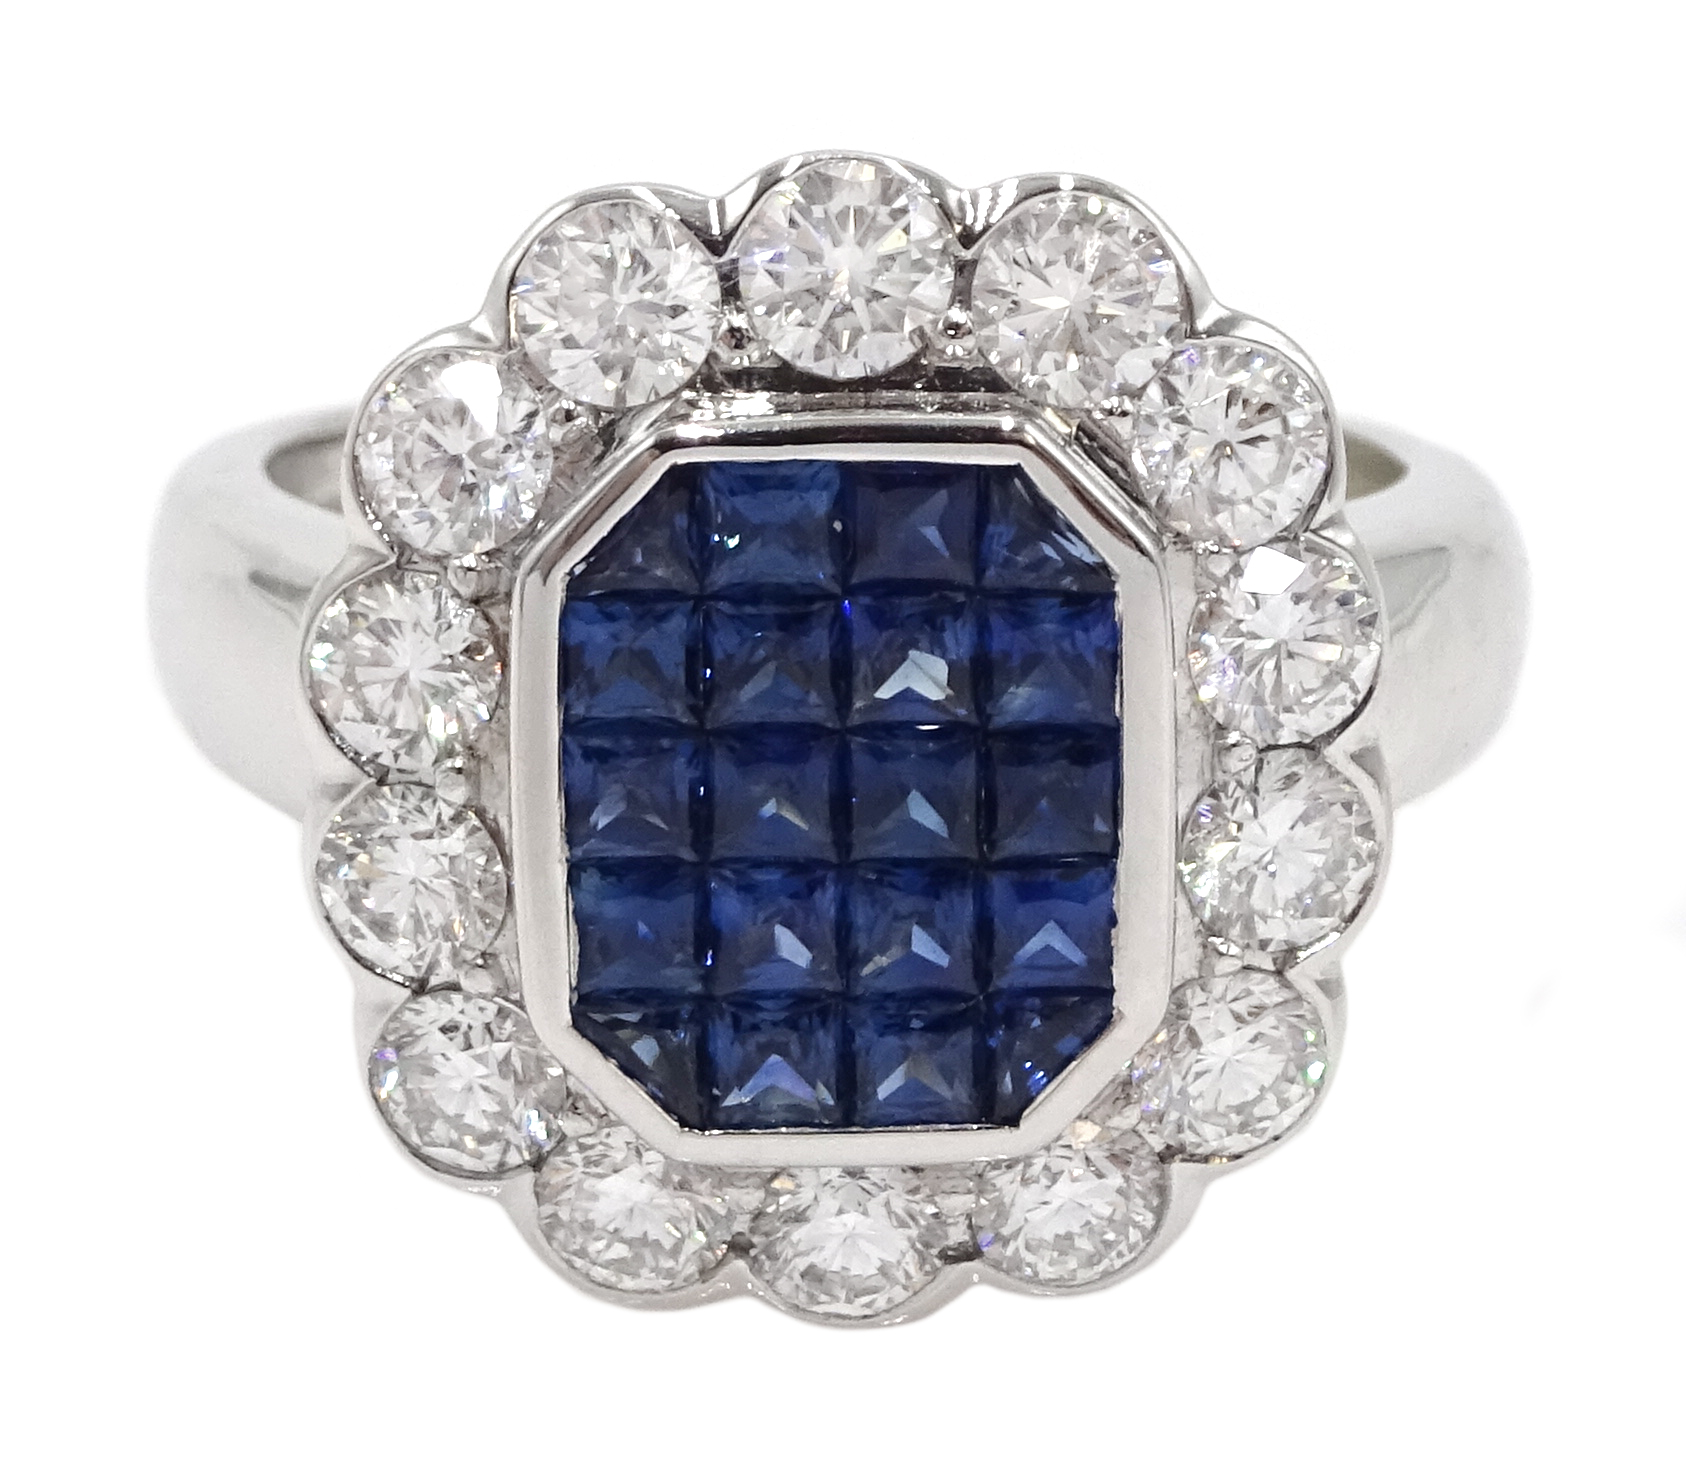 18ct white gold, sapphire and diamond cluster ring